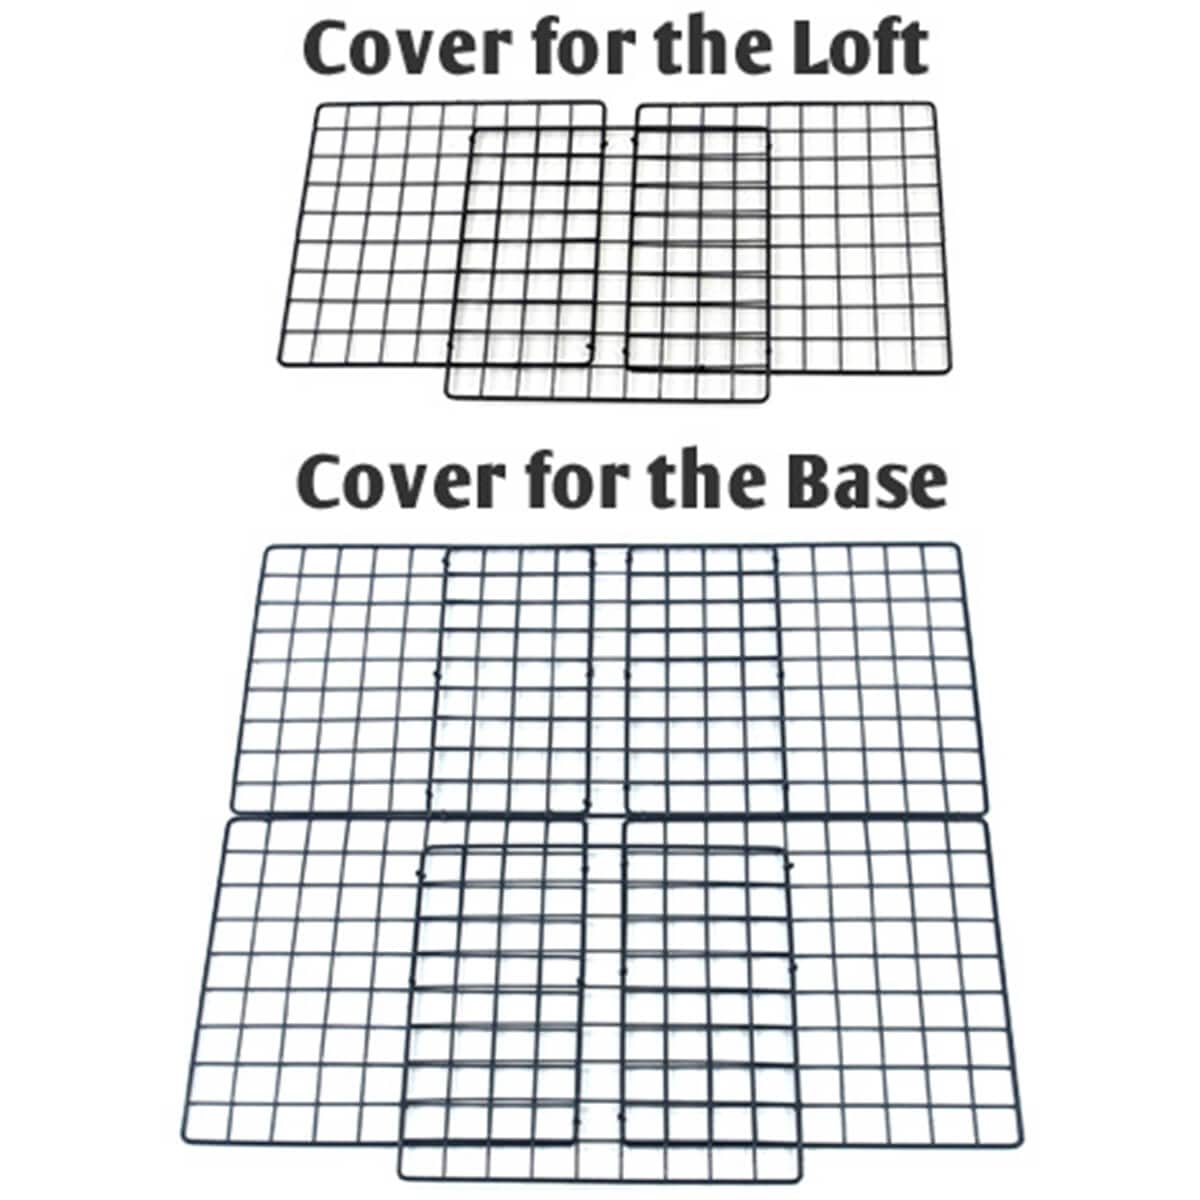 How to lay your grids out for a small/narrow covered C&C guinea pig cage